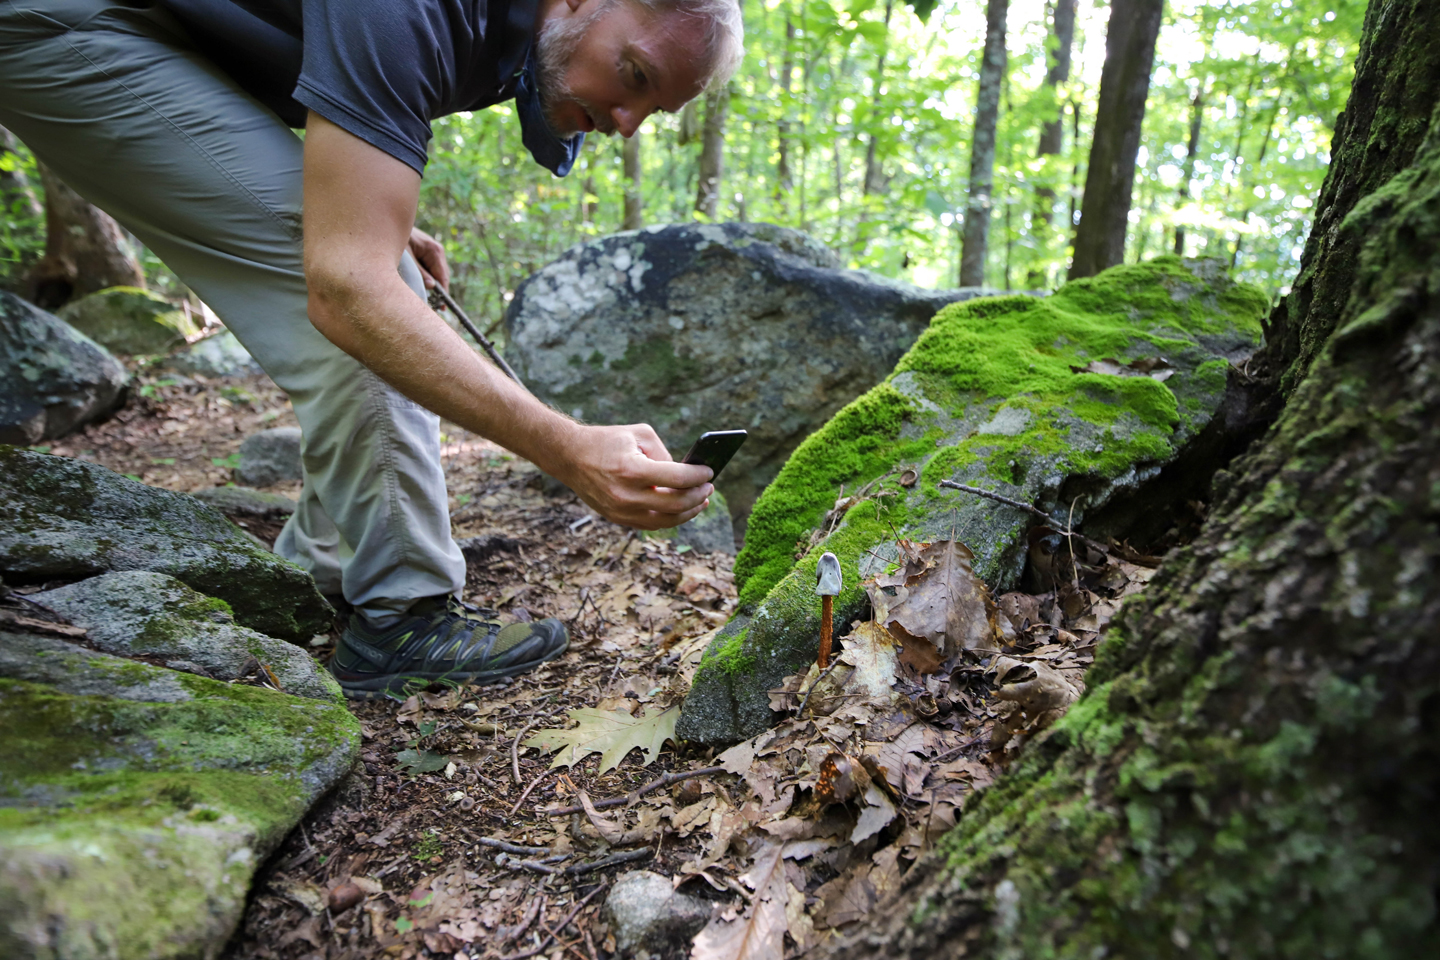 Scott Park spots an interesting mushroom on this recently protected property.